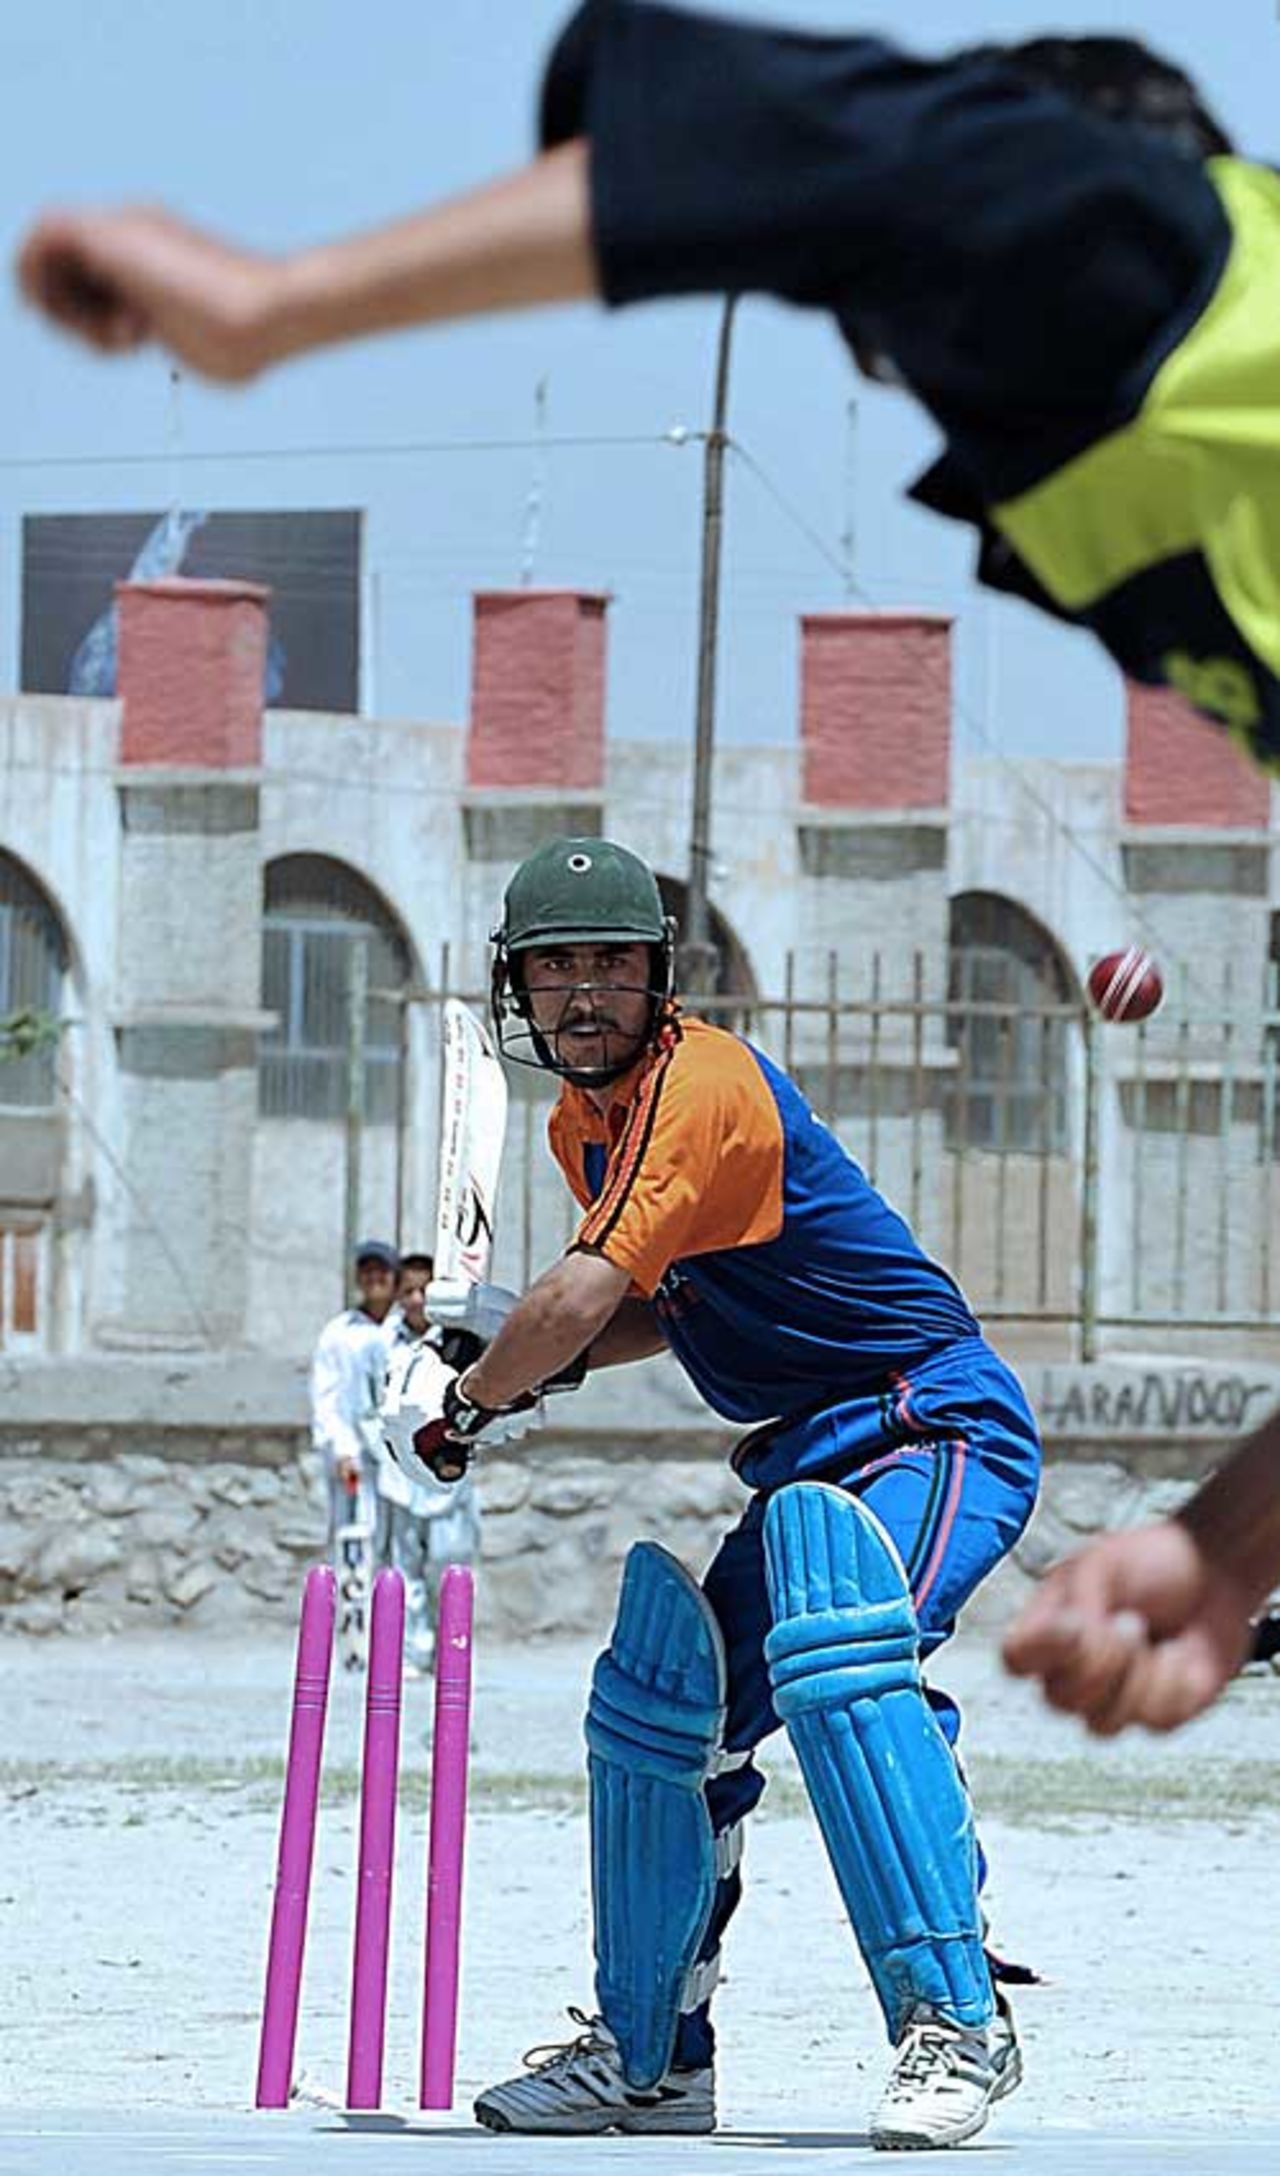 Afghan cricketers take part in a game in front of the Kabul Stadium. Cricket is popular among Afghans who have lived in Pakistan and recently returned to their country after decades of war. The national team will play eleven others in the ICC  World Cricket League Division 5 in late May, Kabul, May 1, 2008